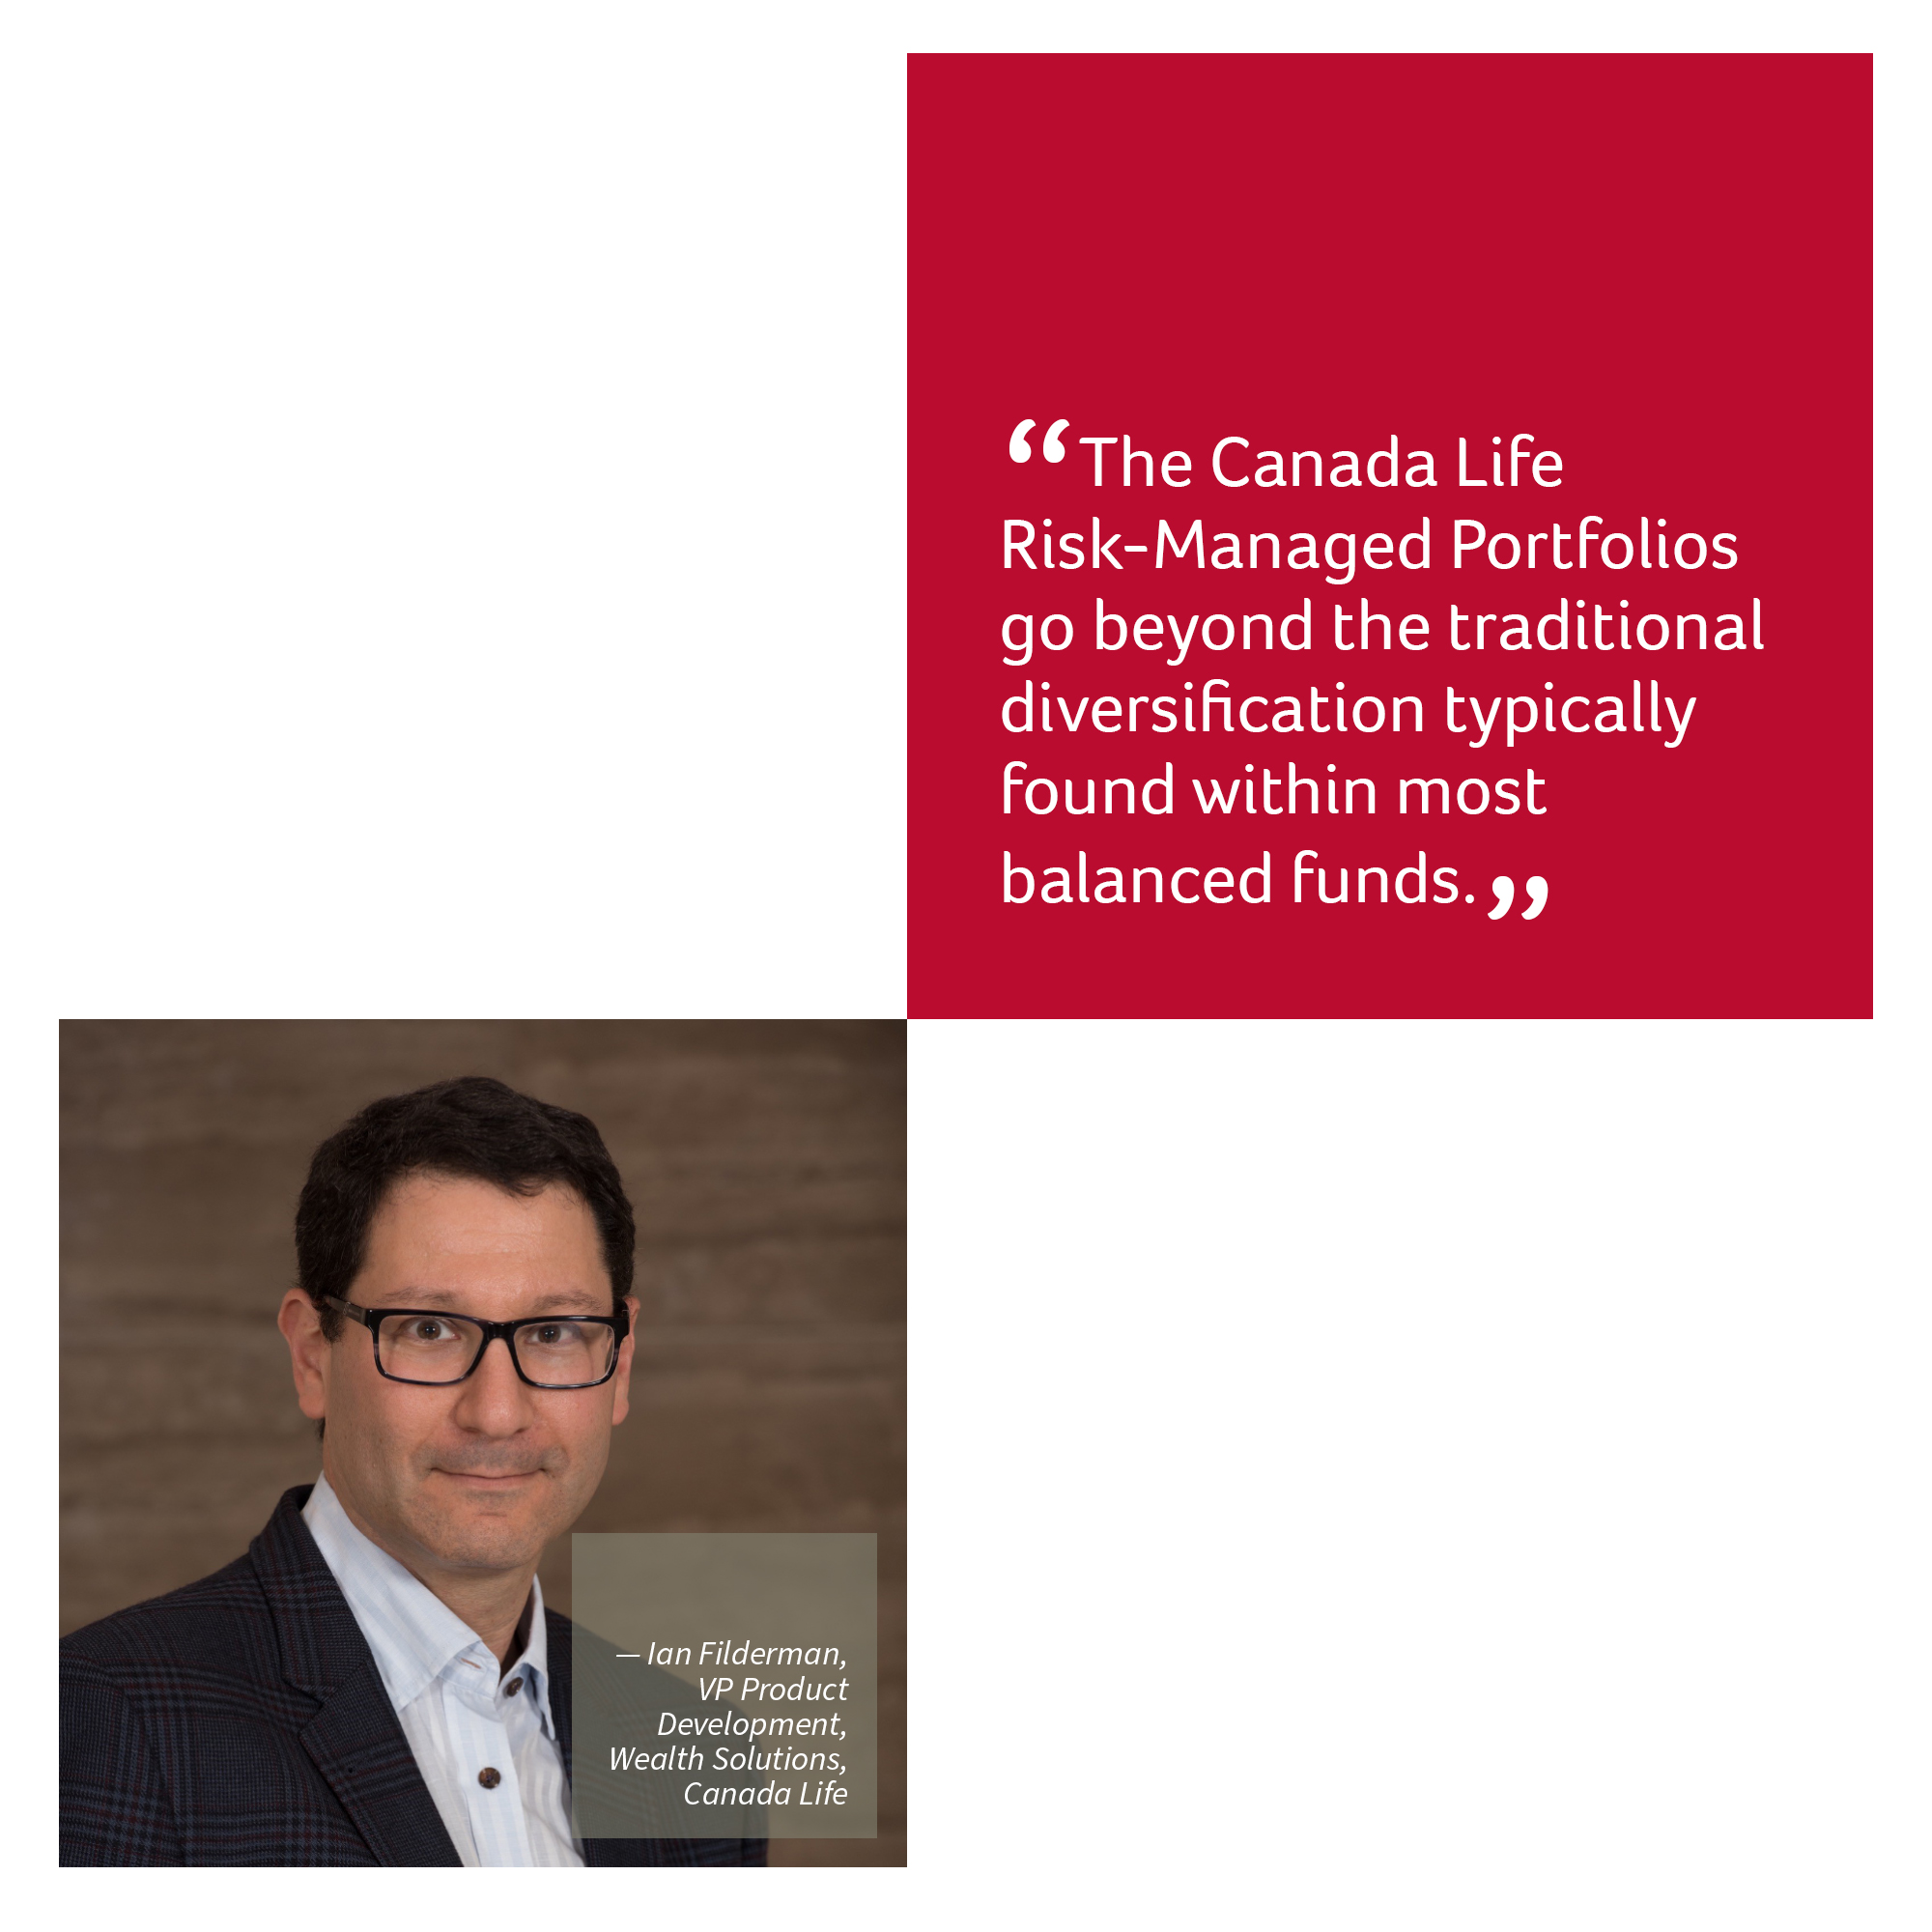 “The Canada Life Risk-Managed Portfolios go beyond the traditional diversification typically found within most balanced funds.”  — Ian Filderman, VP Product Development, Wealth Solutions, Canada Life